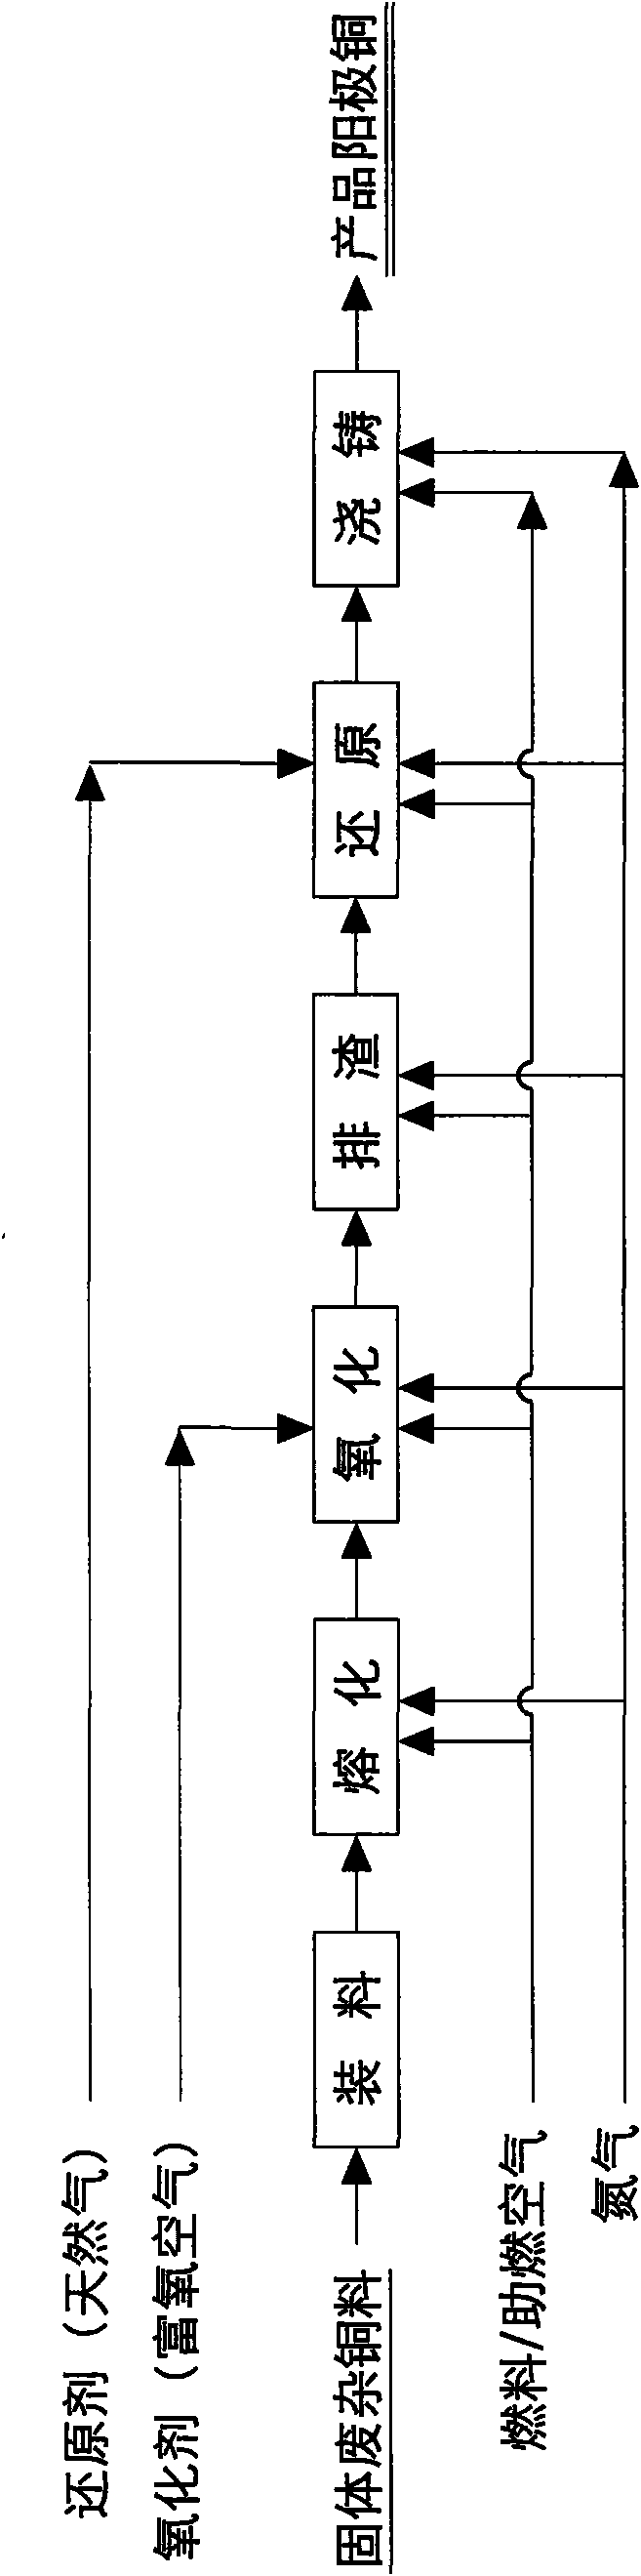 Process and apparatus thereof for refining copper scraps by using nitrogen gas stirring and oxygen-enriched oxygen gas